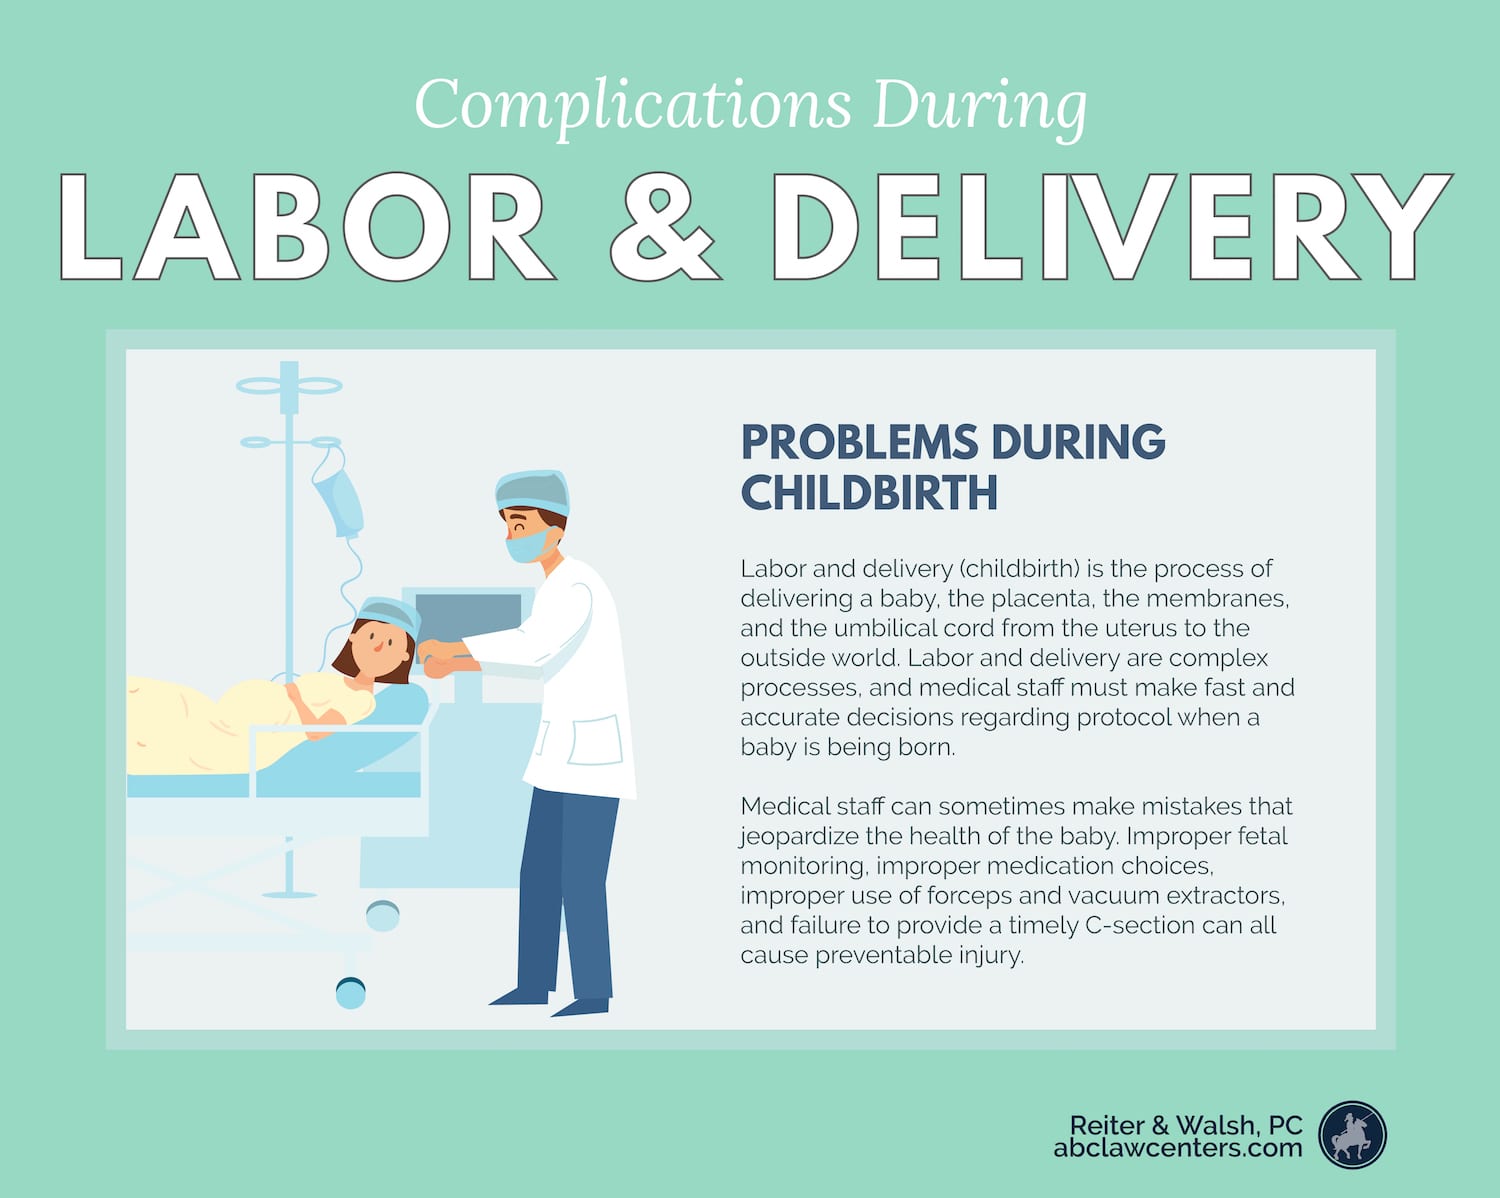 Childbirth, Labor, and Delivery Complications